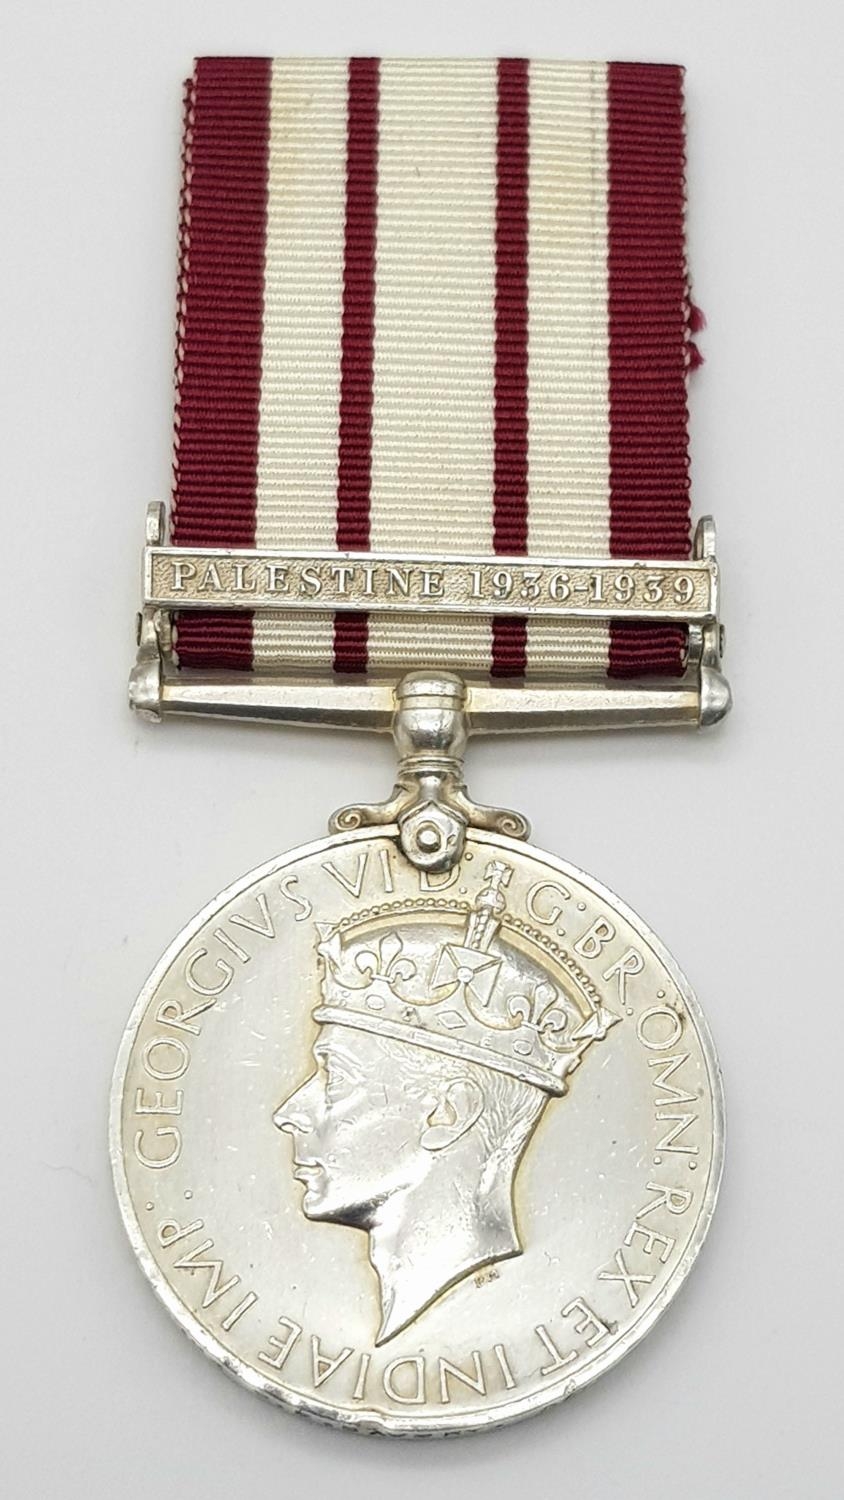 Naval General Service Medal 1915, with clasp Palestine 1936-1939. Named to: D/J99753 S E Savory A/